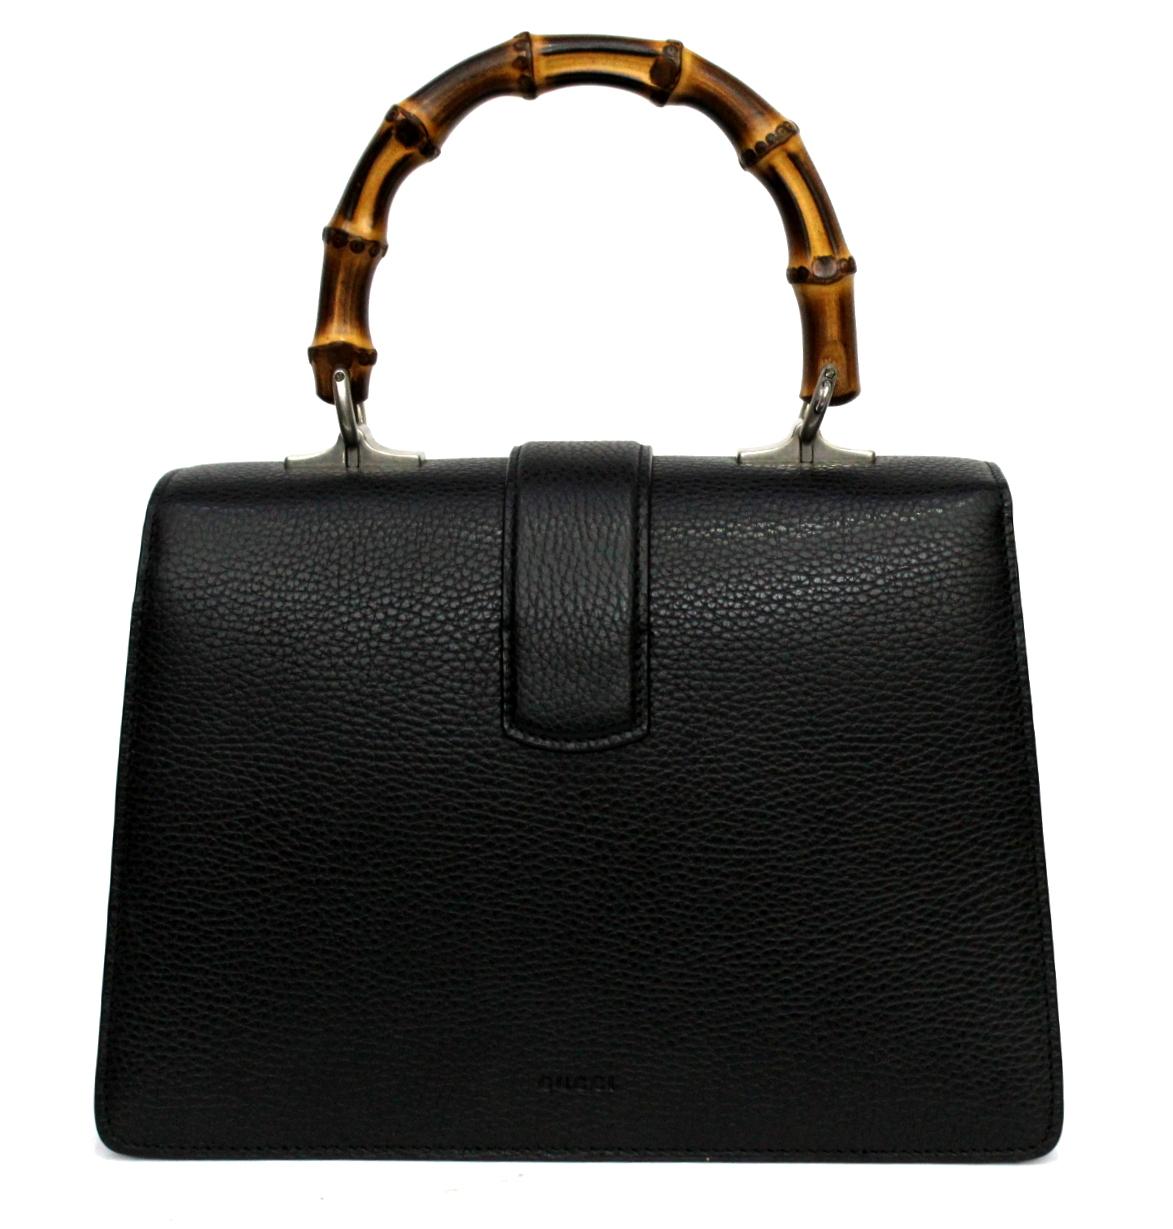 Gucci Dionysus bag made of black hammock leather and bamboo handle. the closure is particular, embellished by the head of tiger and swaroski. the bag is like new but does not have its shoulder strap.